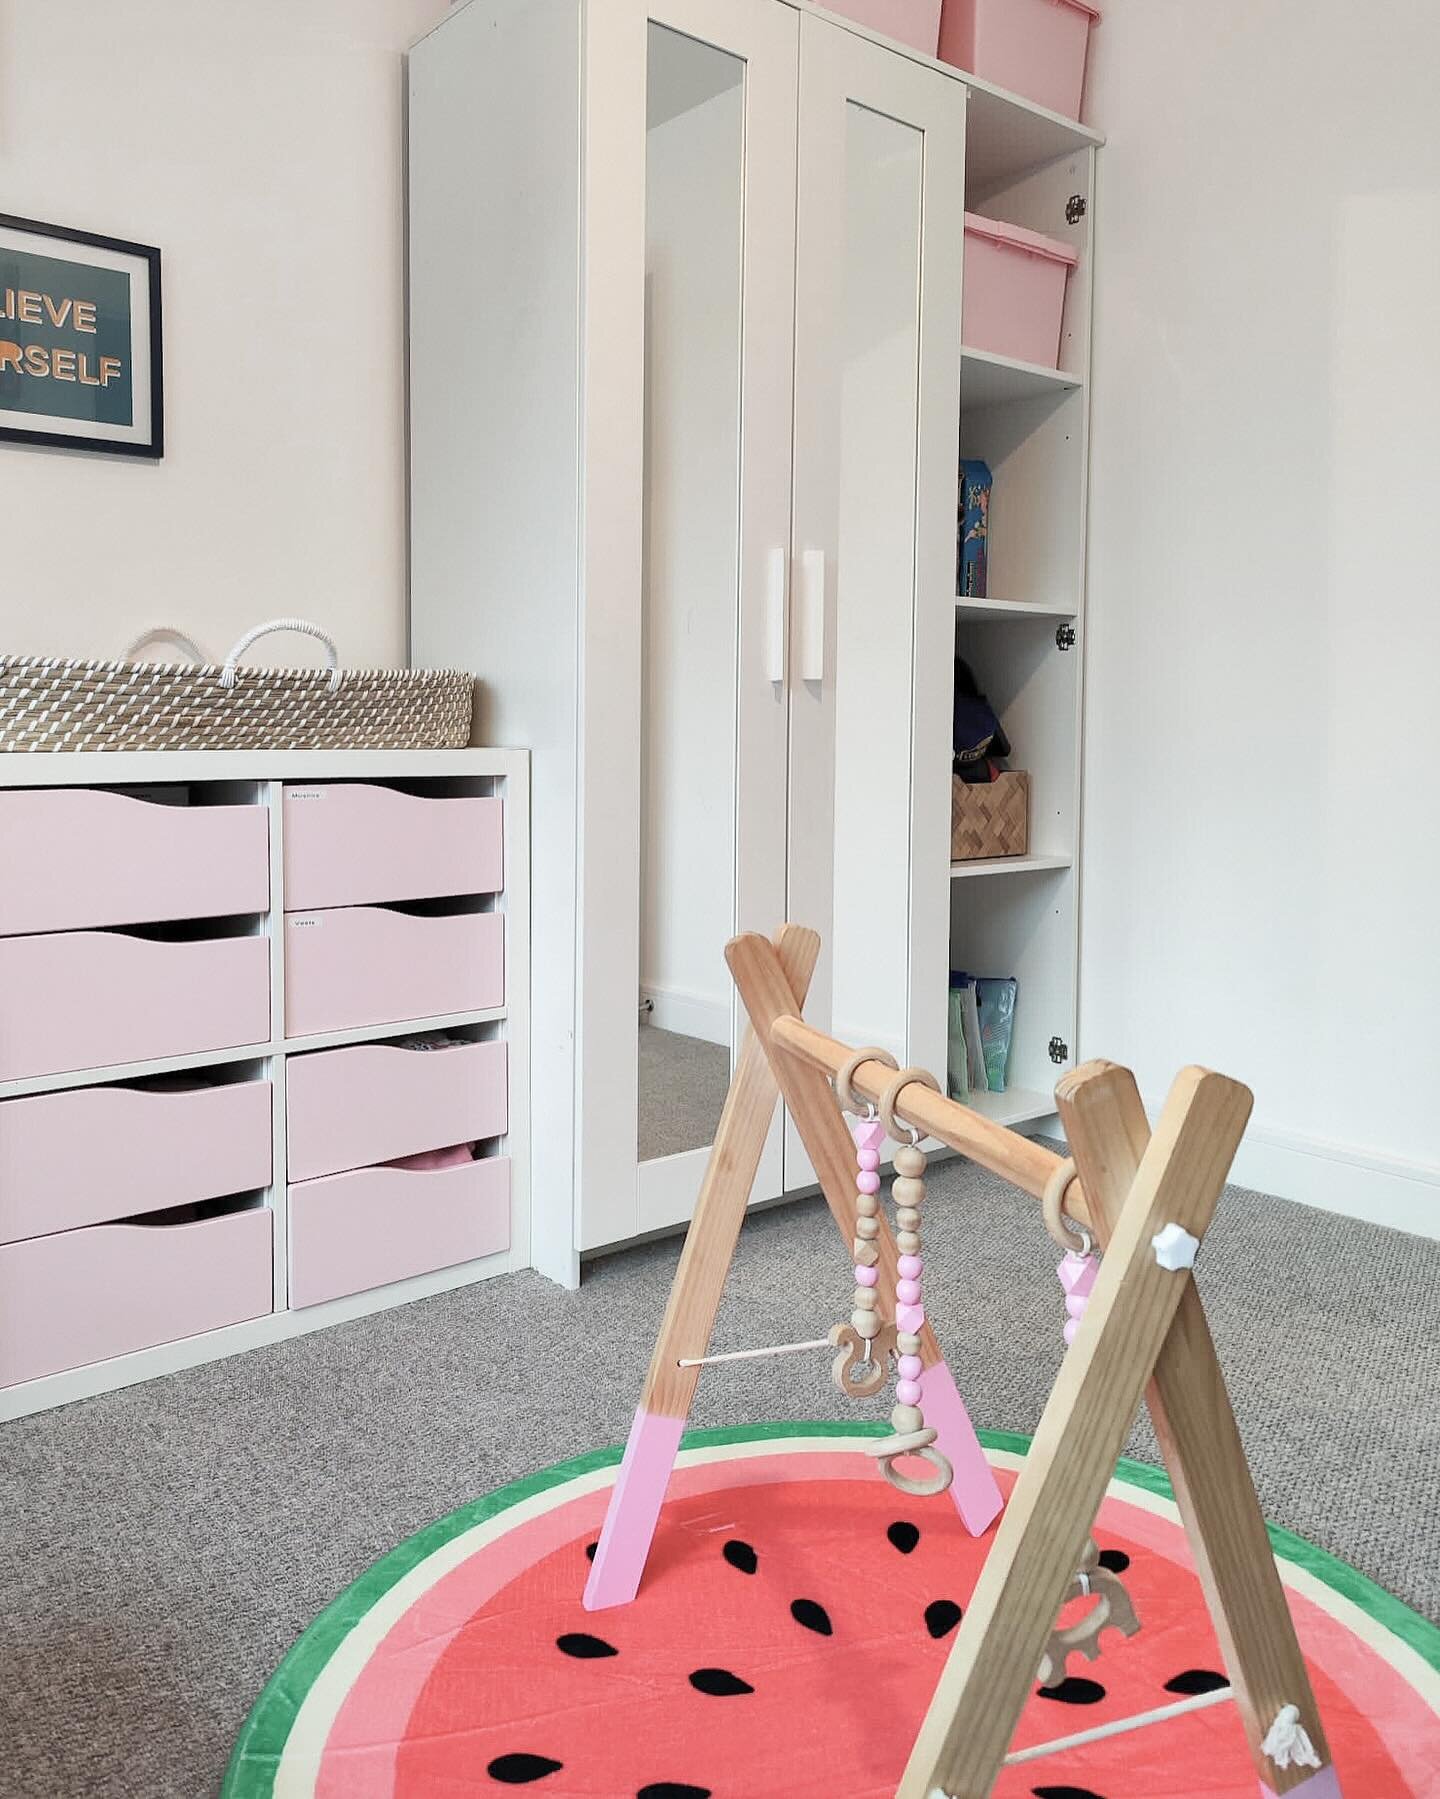 We had so much fun organising this playroom!💕🍉🌸✨🤪🌷🤖💘

With a new craft area, dressing up cupboard, a colour-coded Lego station and a place for the little one to chill - we&rsquo;ve created a place for all 4 of our client&rsquo;s children to en